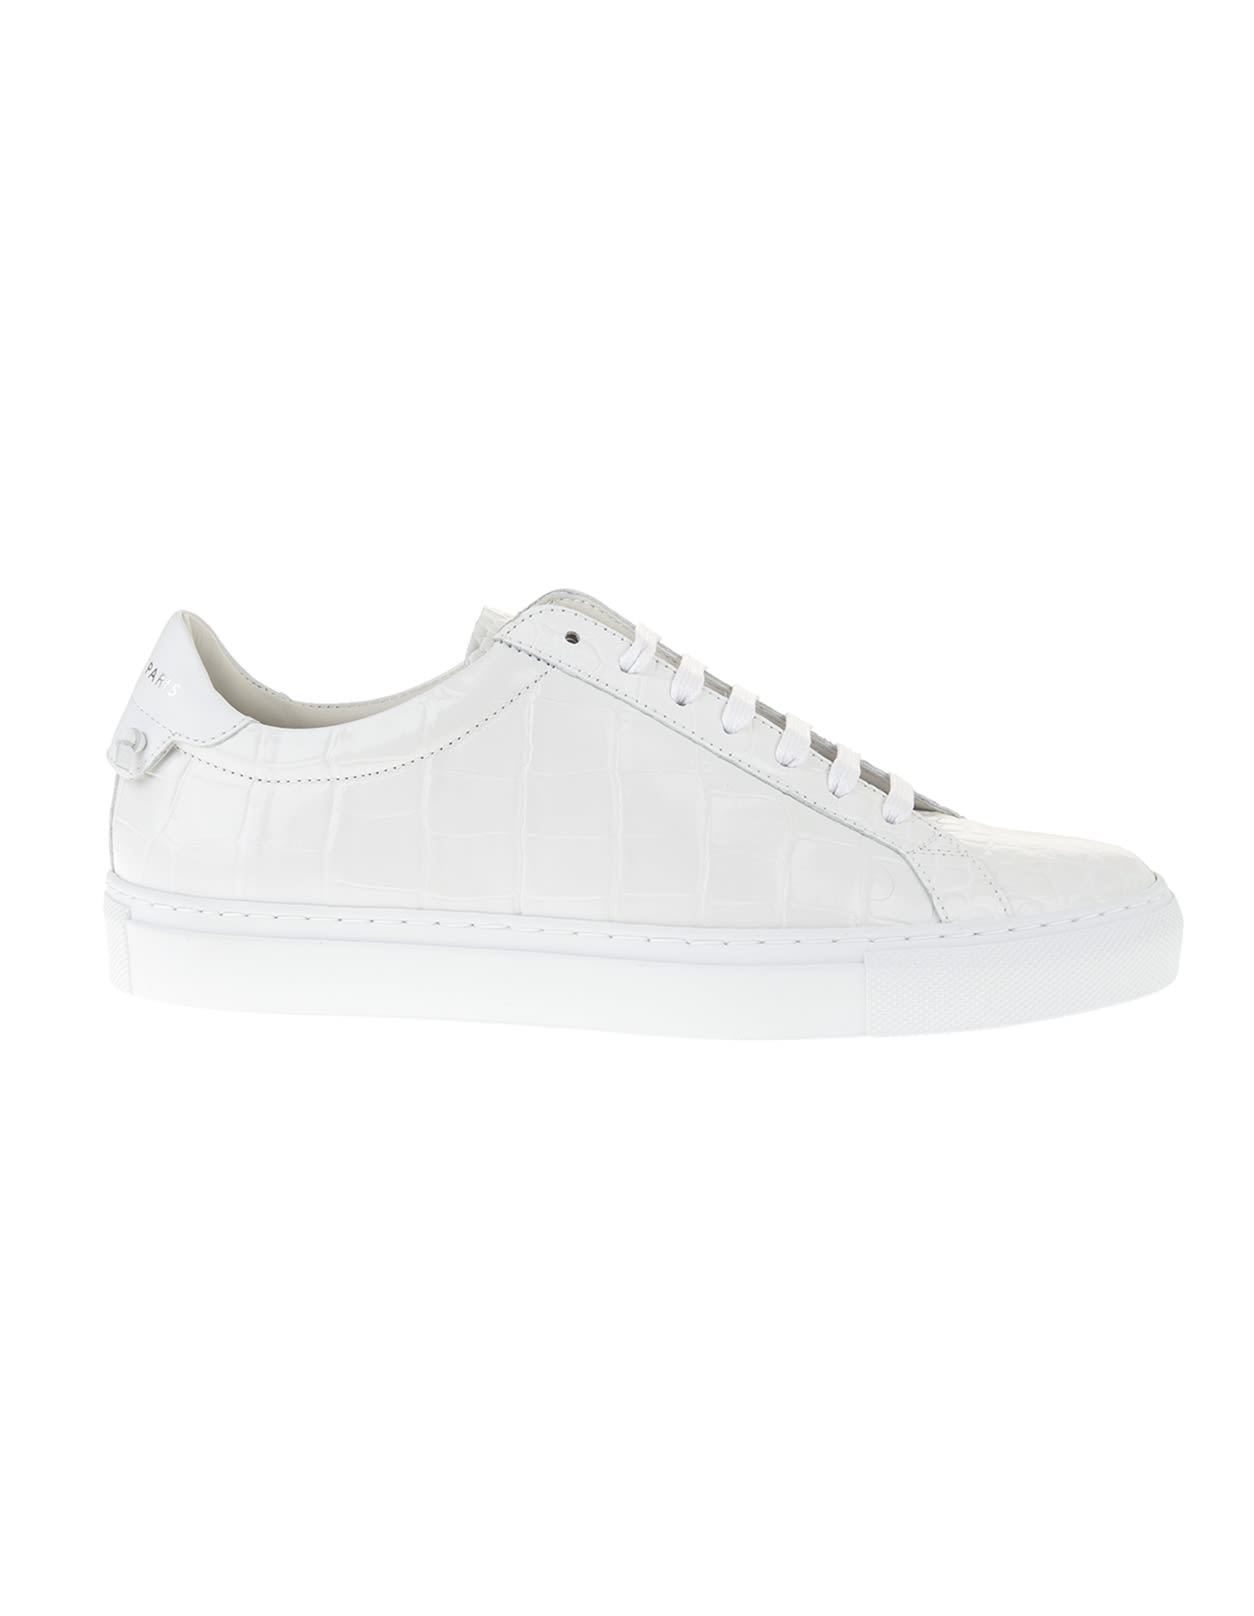 GIVENCHY WOMAN WHITE SNEAKERS WITH GIVENCHY 4G LACES,BE0003E0GC 100